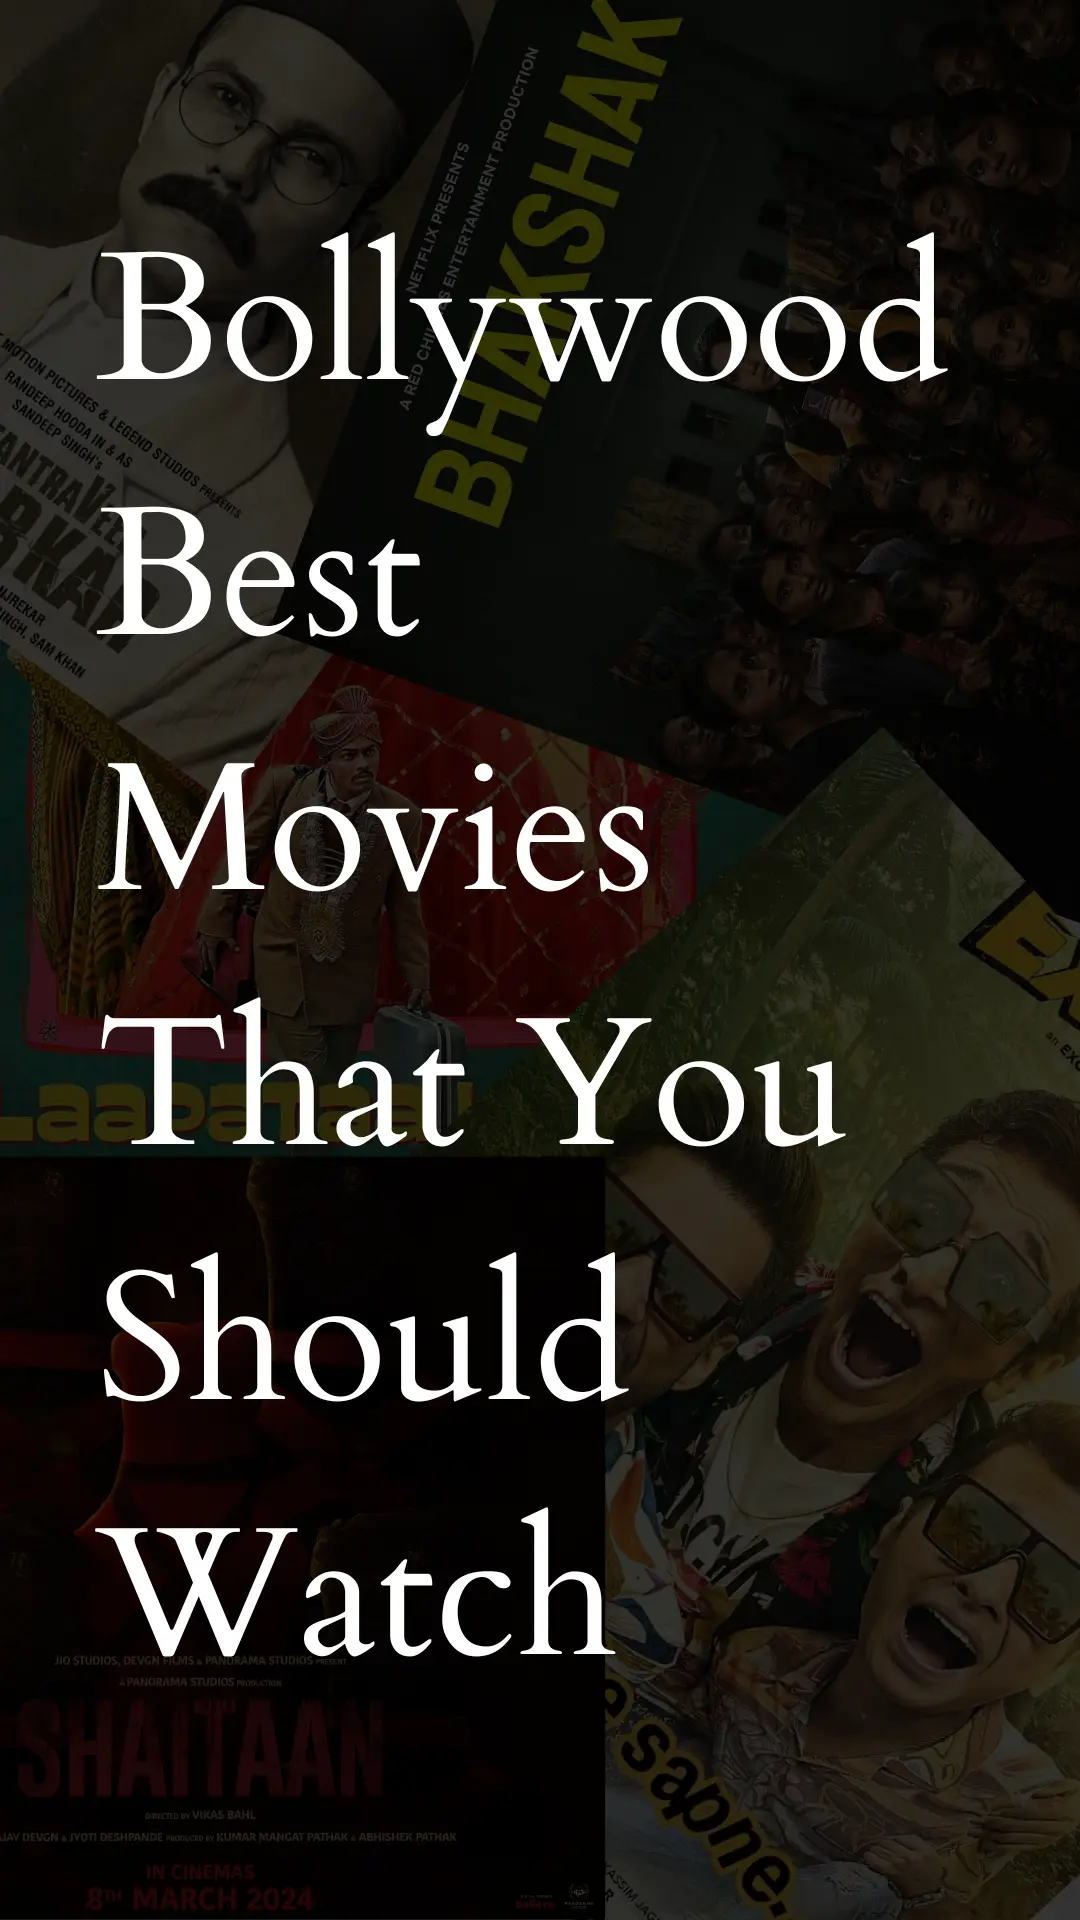 Bollywood Best Movies That You Should Watch